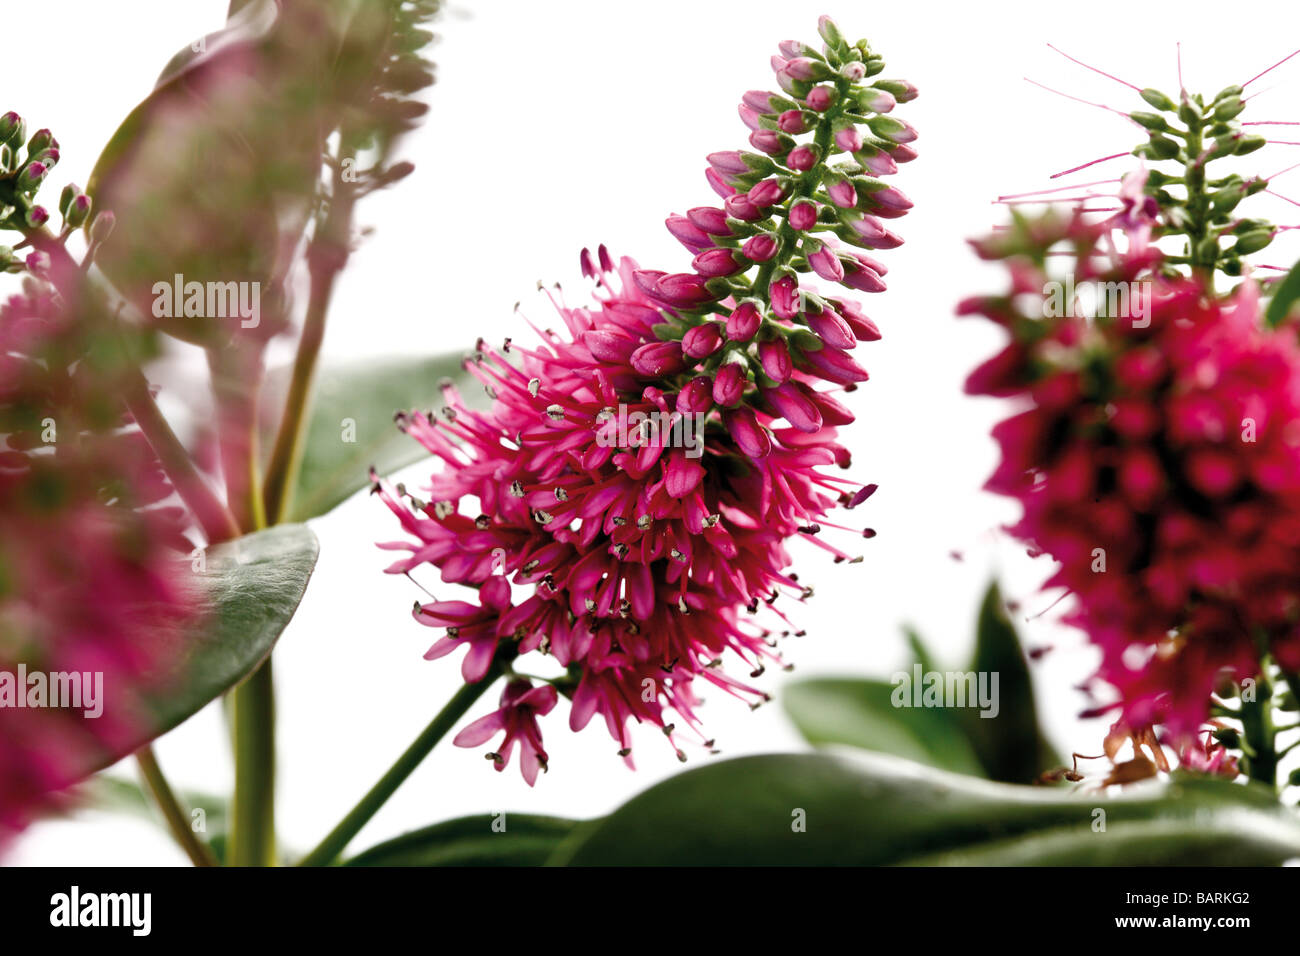 Hebe plant in blossom, close-up Stock Photo